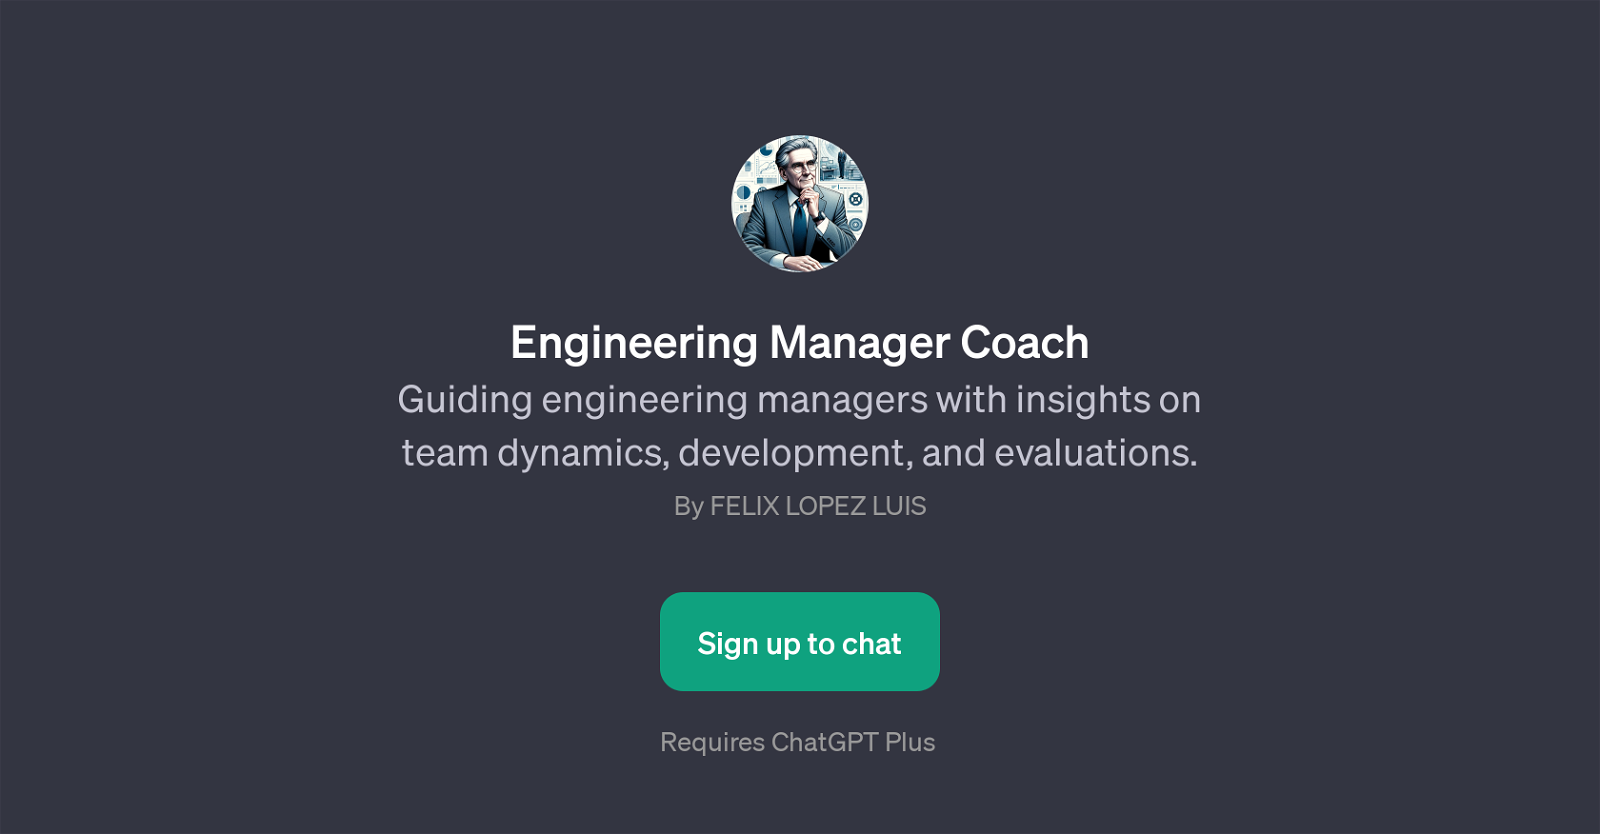 Engineering Manager Coach website